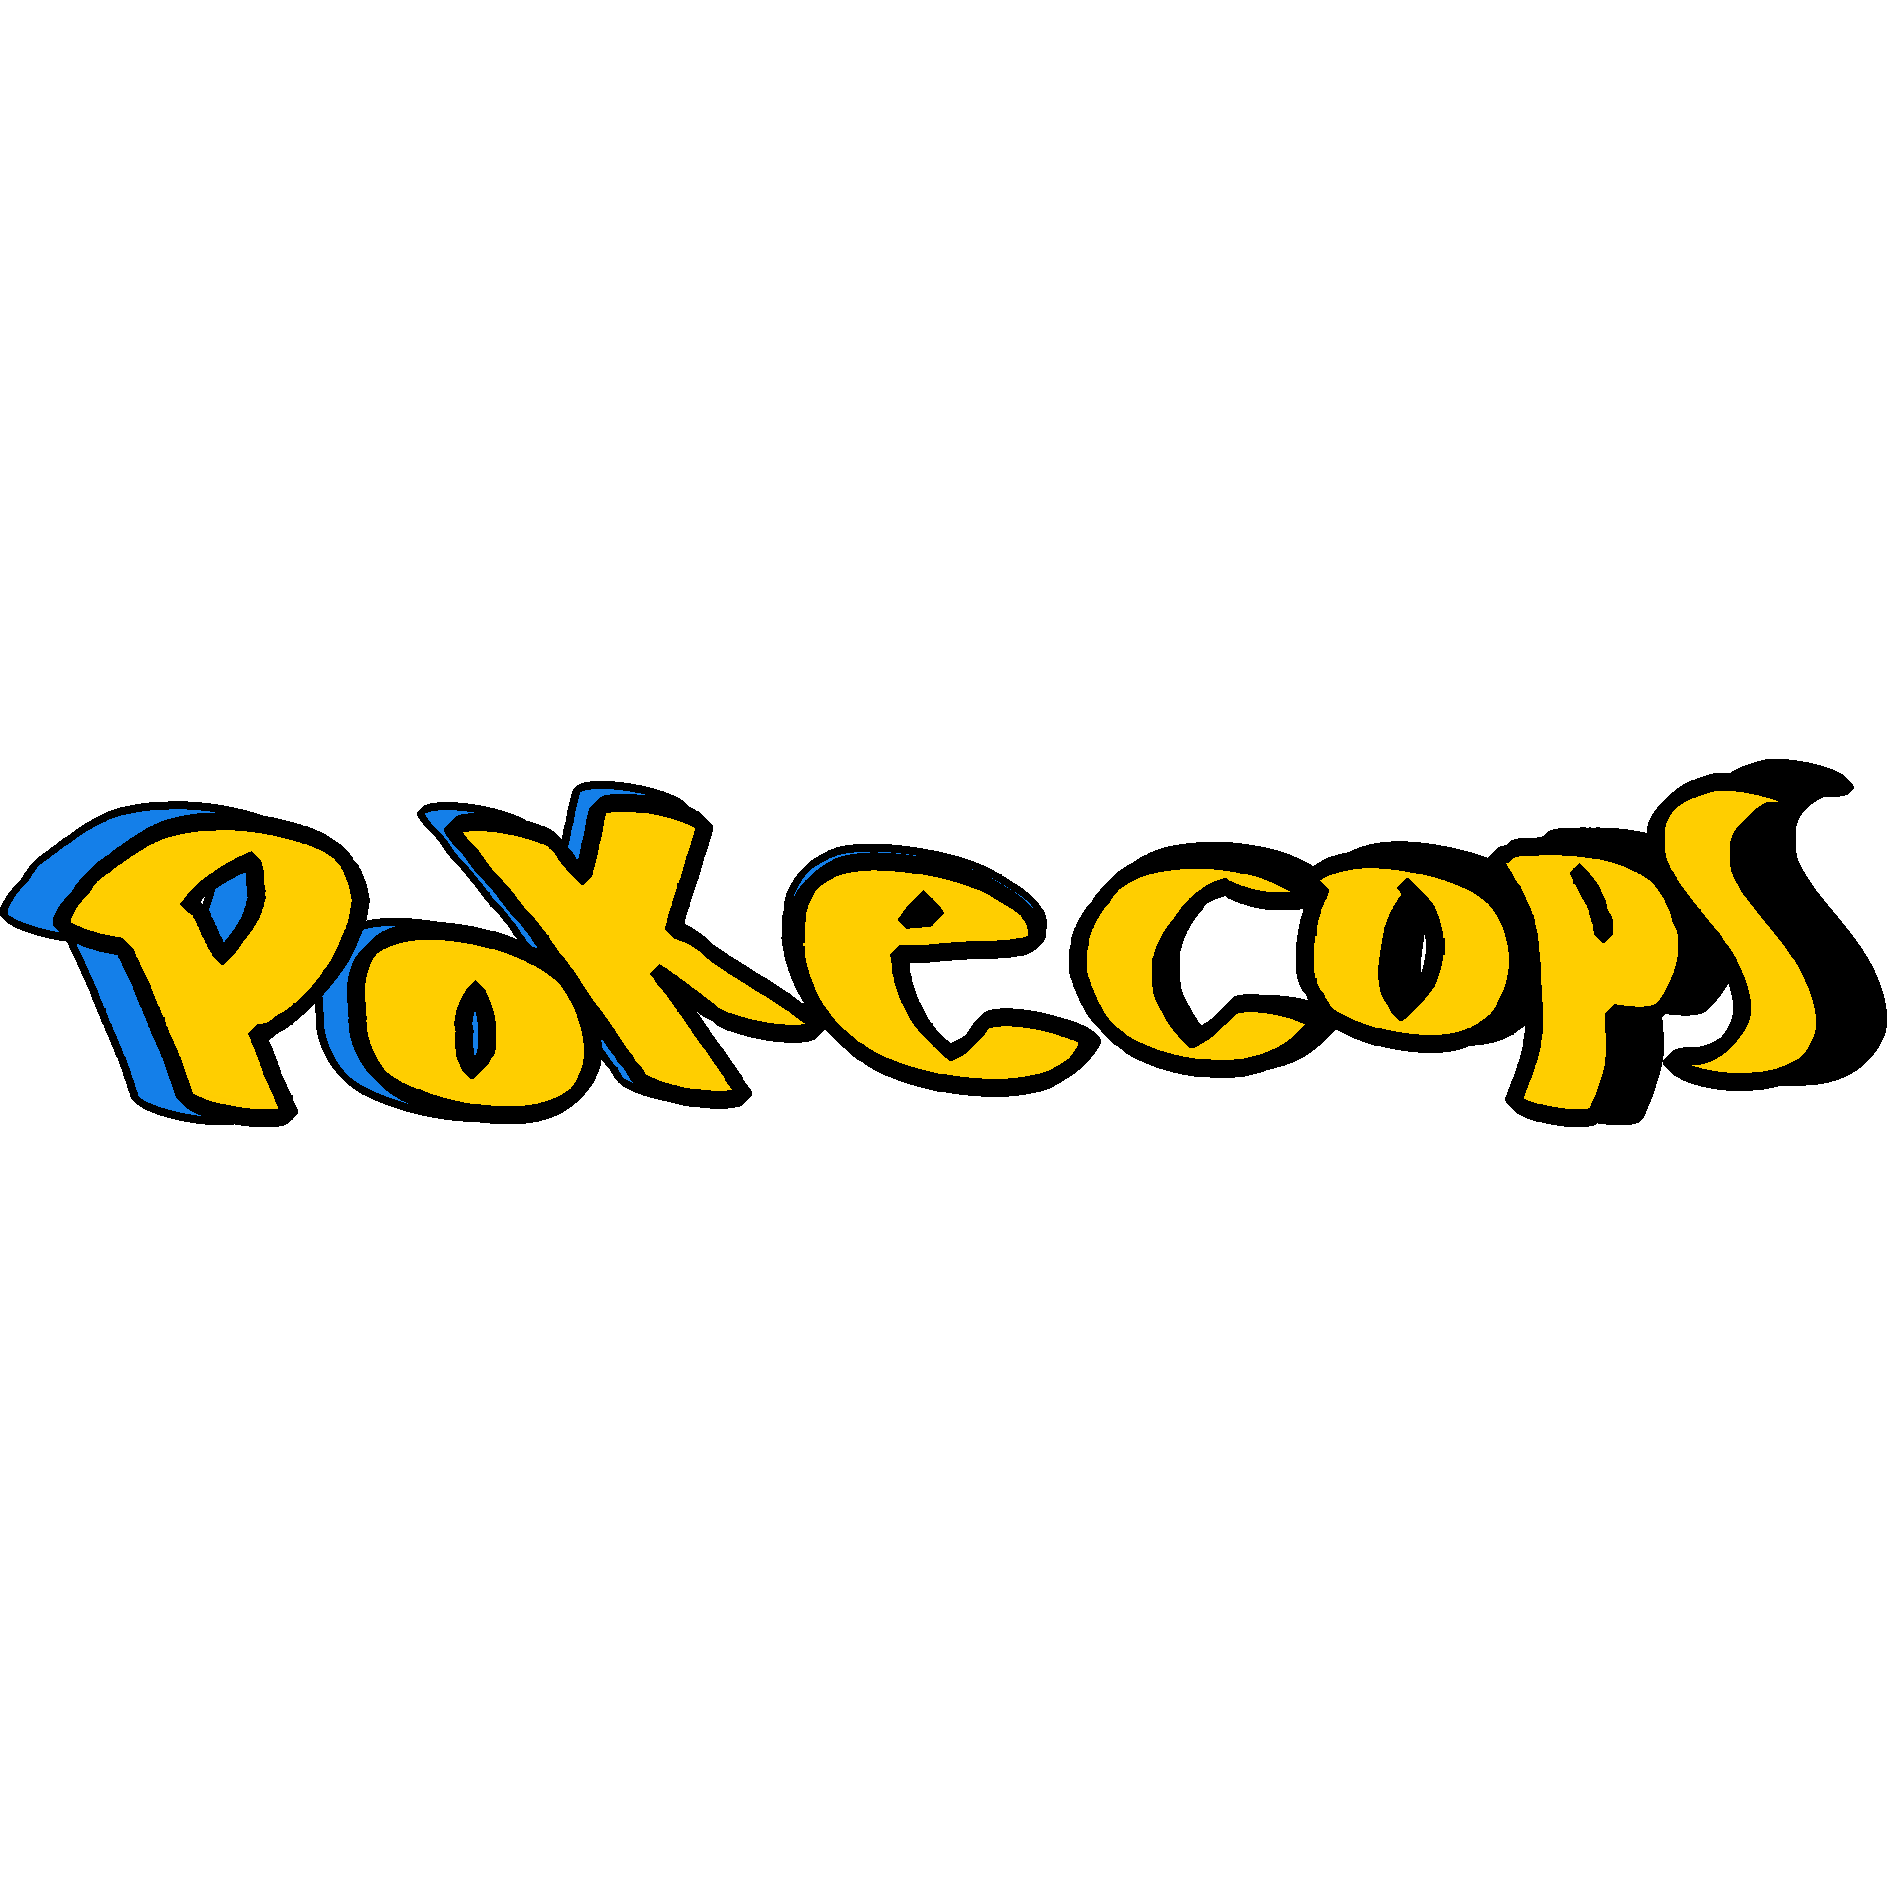 PokeCops is the best site to buy pokemon cards and tcg online codes. Cheap, Fast, and Leading the Top 10.